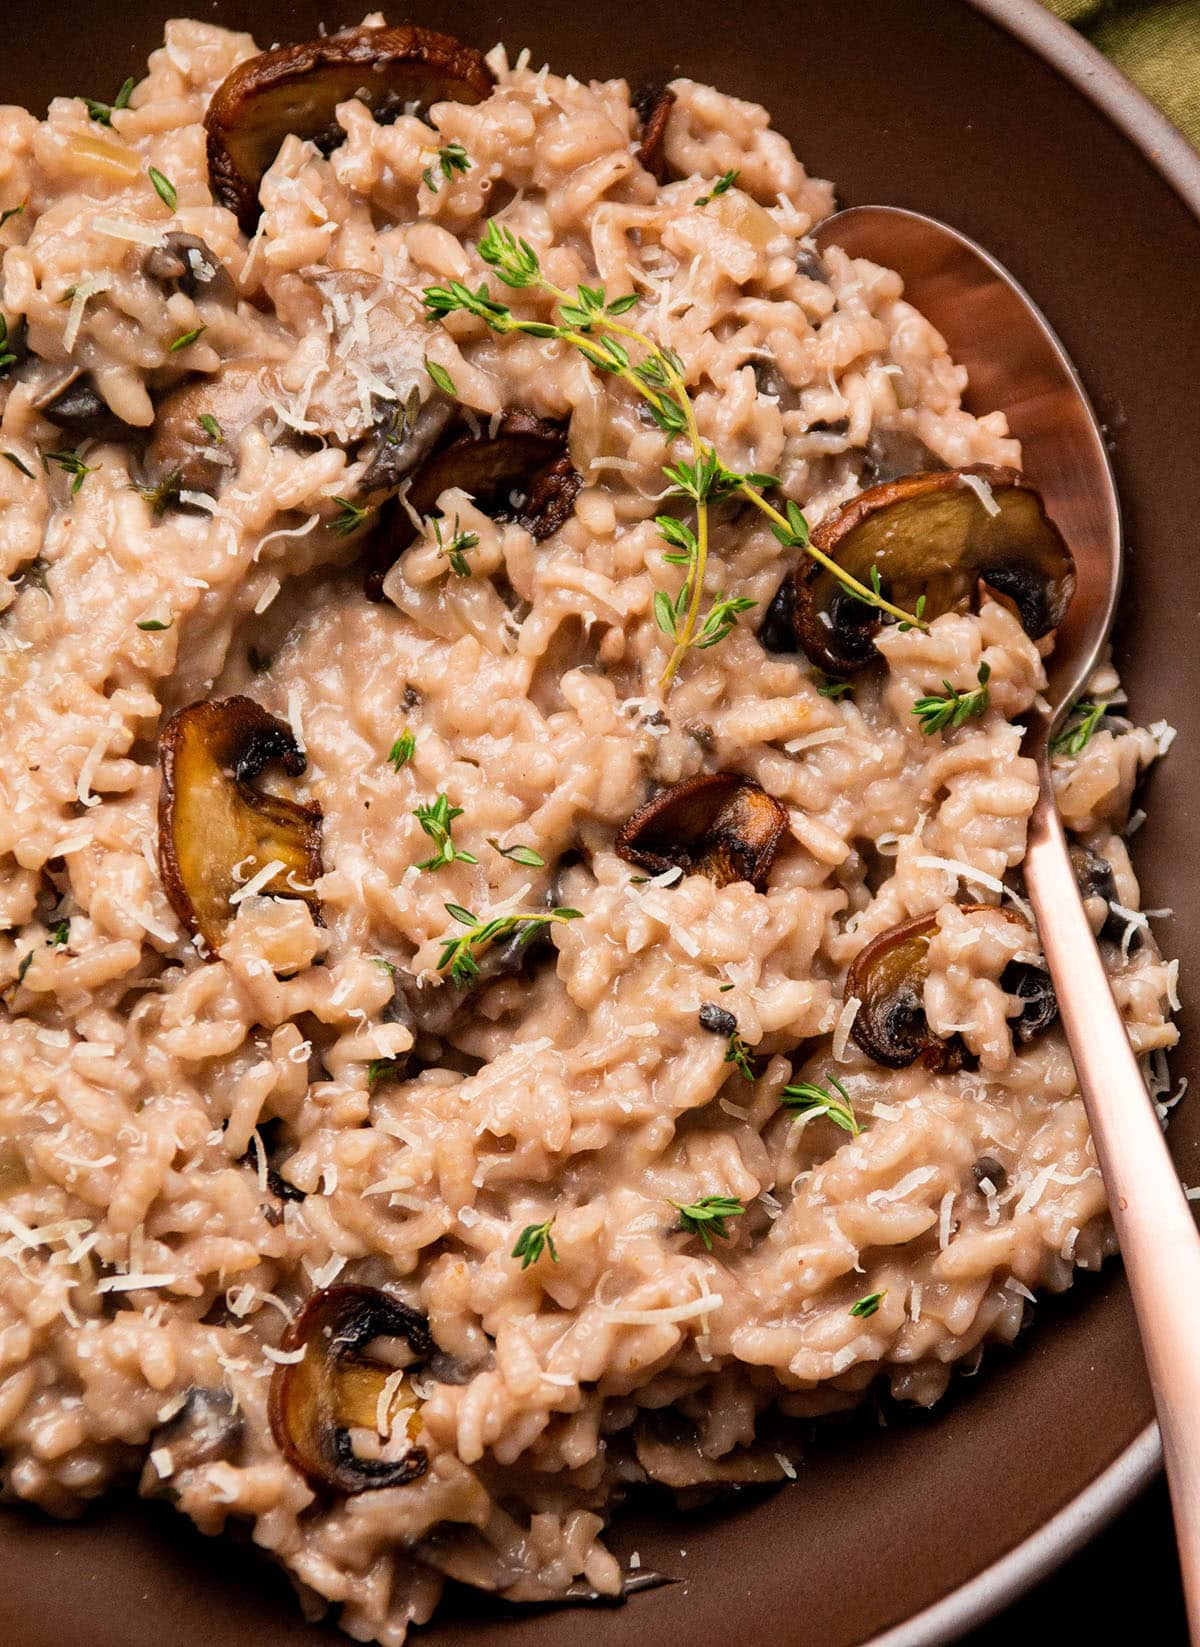 Red wine risotto topped with mushrooms and fresh thyme.